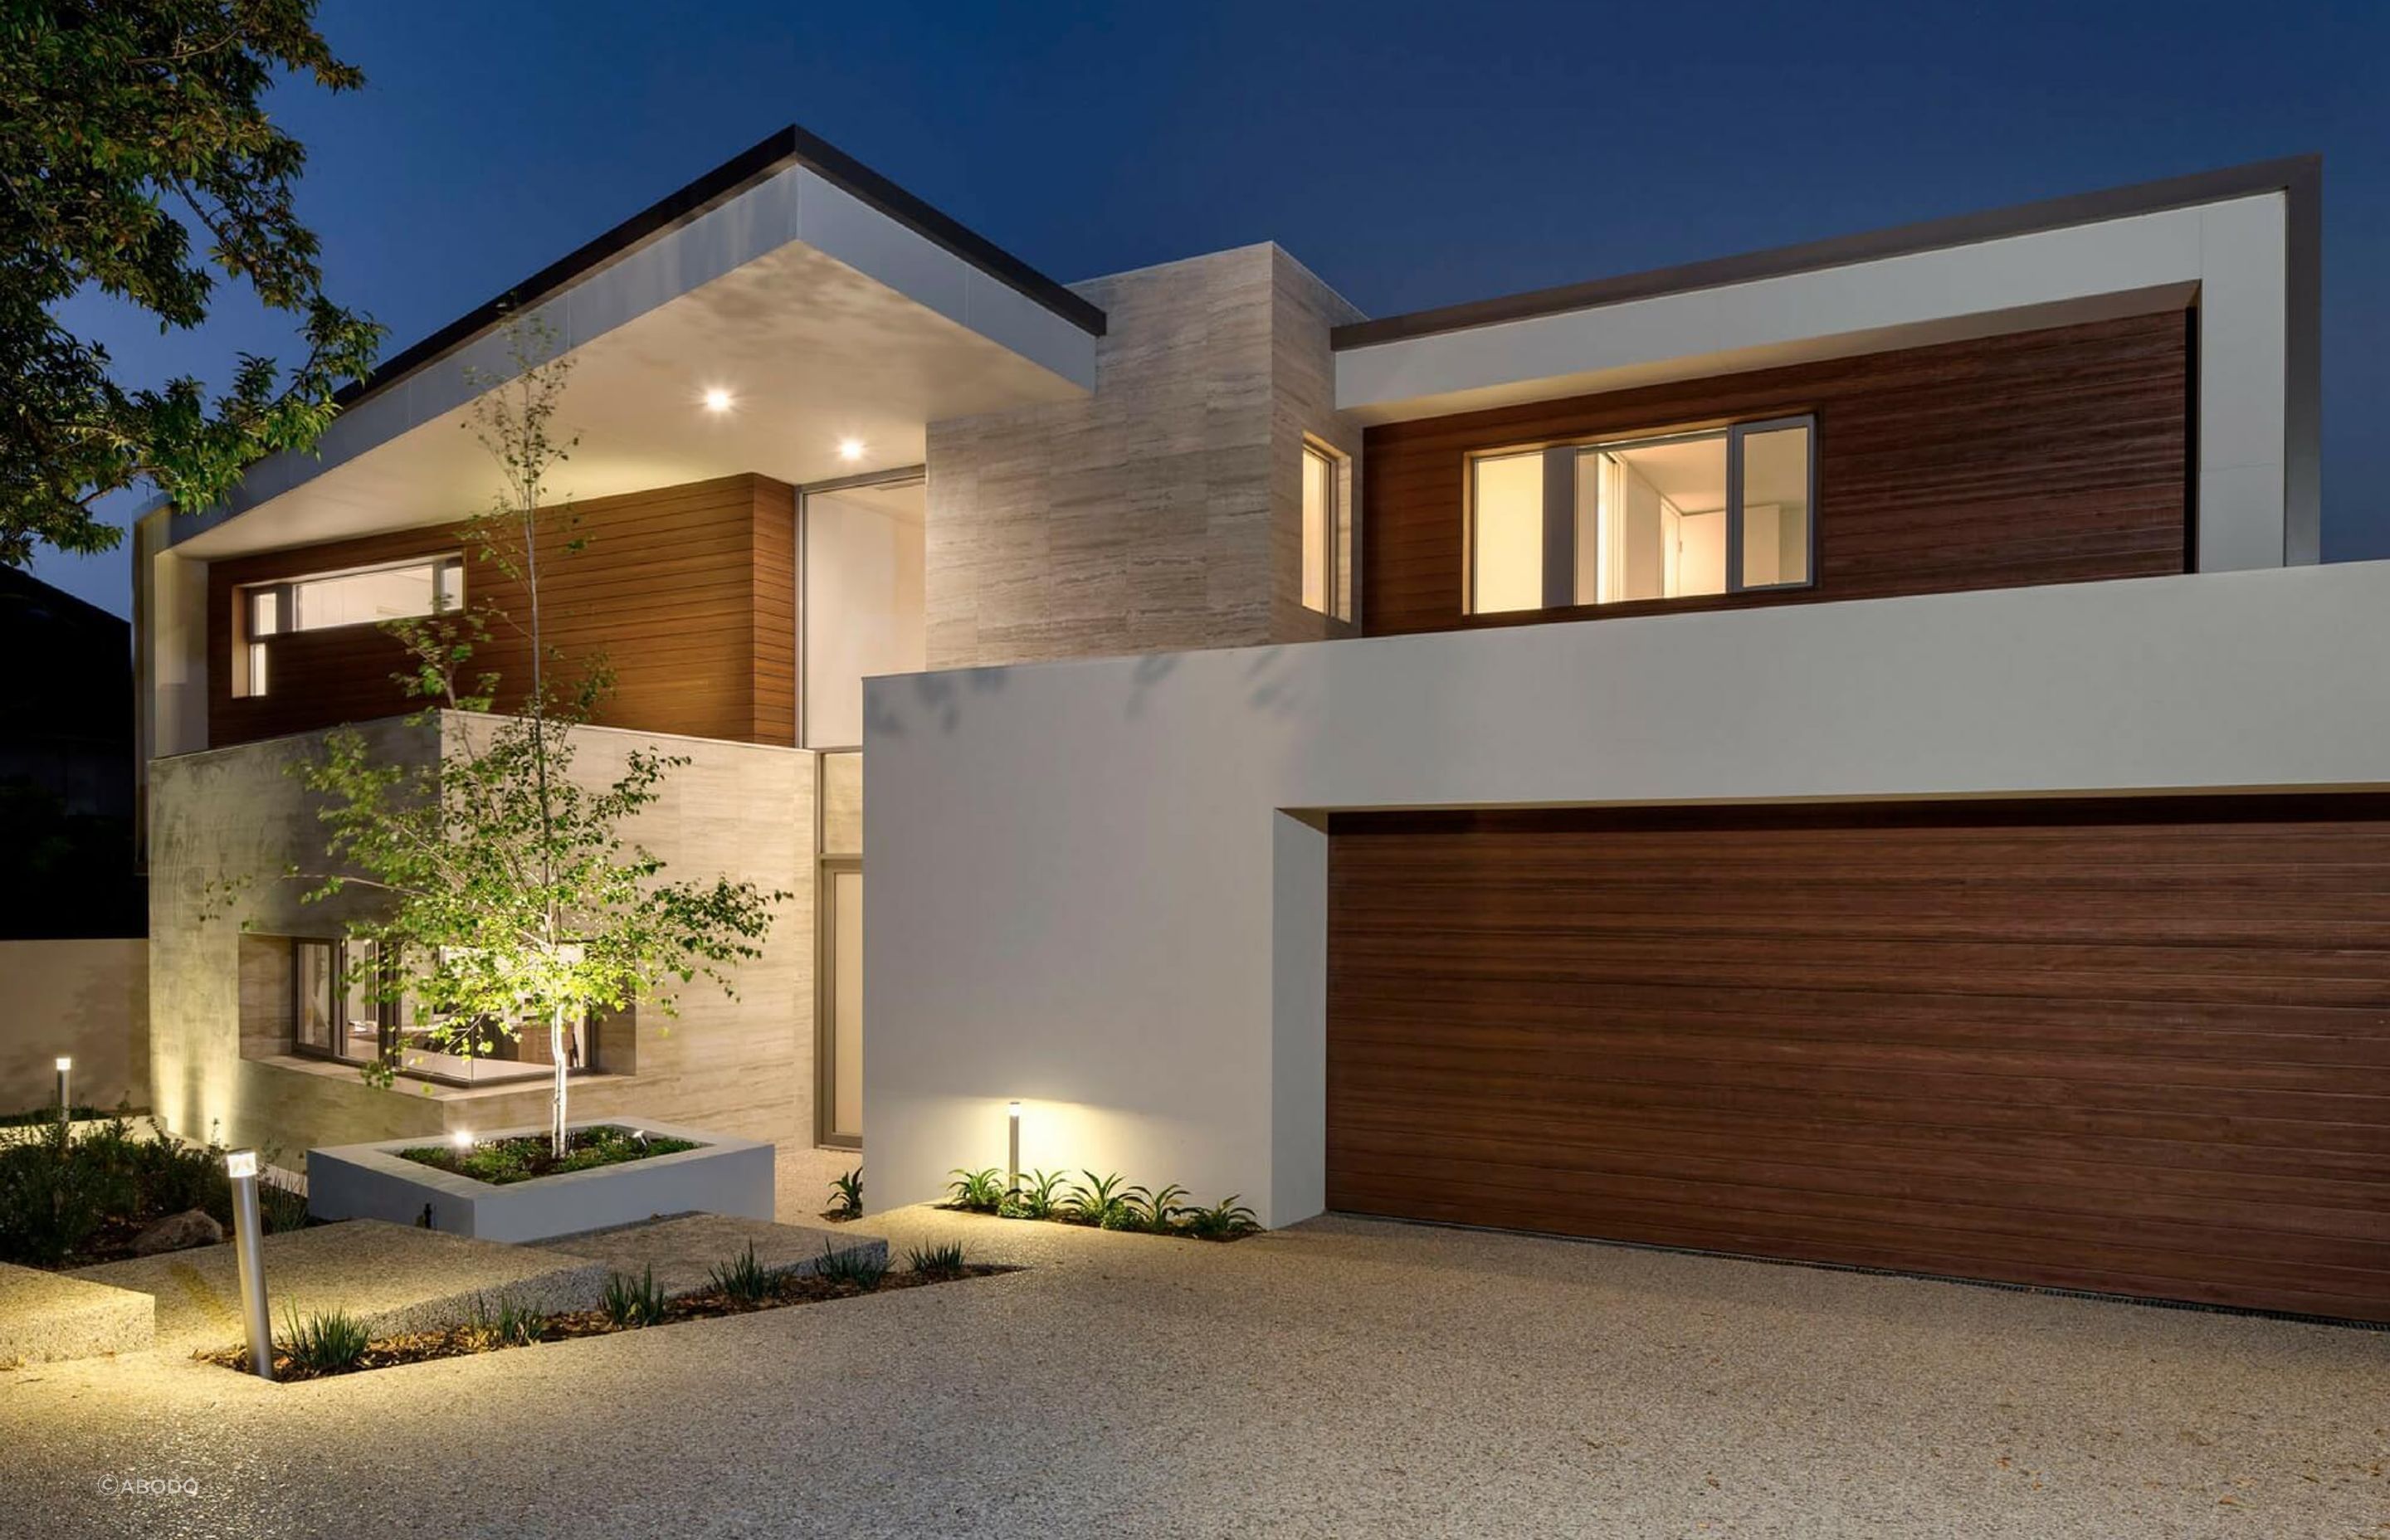 Timber weatherboards contrast nicely with the clean exterior of this house.